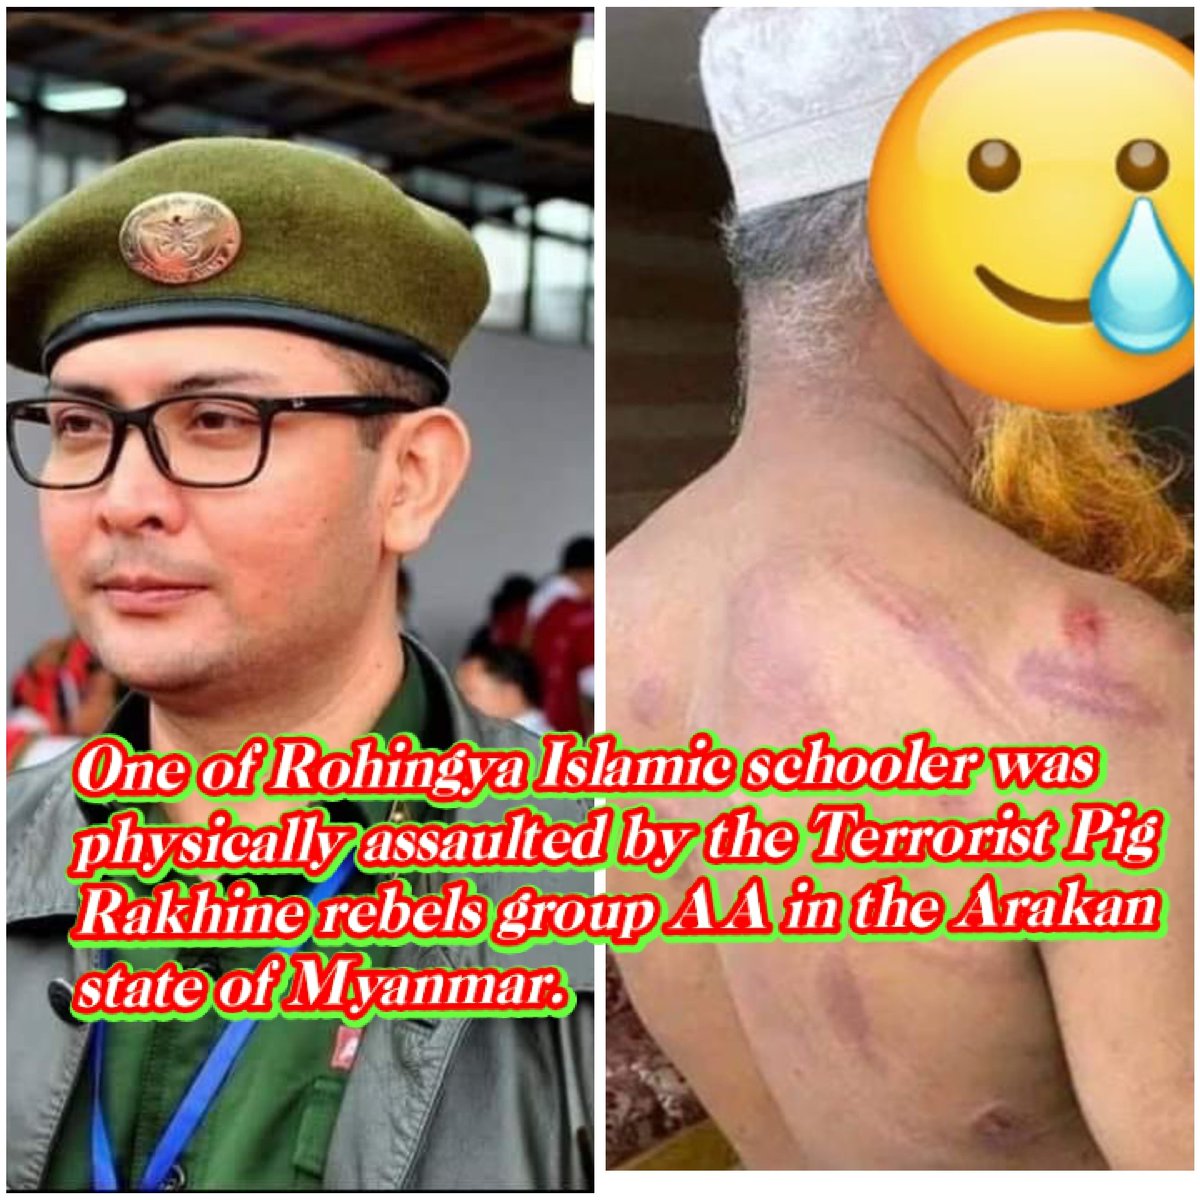 In Buthidaung township Arakan state of Myanmar a Rohingya Islamic schooler was physically assaulted by the terrorist Rakhine rebels group AA members.When asked for food,he refused,so prompting a physical assault by terrorist AA members,highlighting ongoing tensions in the region.